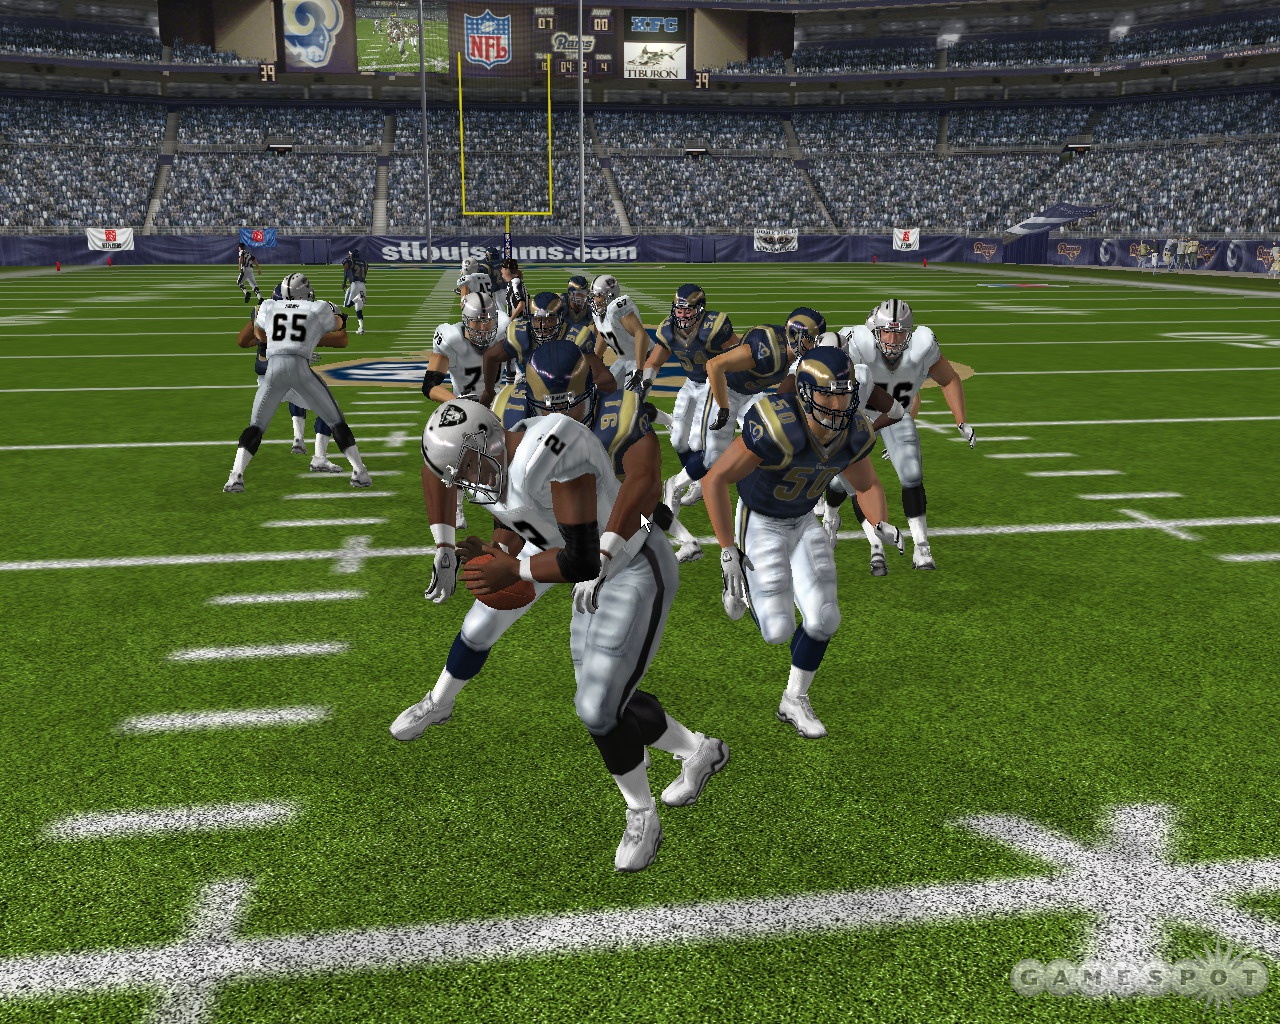 If you bought Madden 07, or Madden 06 for that matter, this might all look a bit familiar.